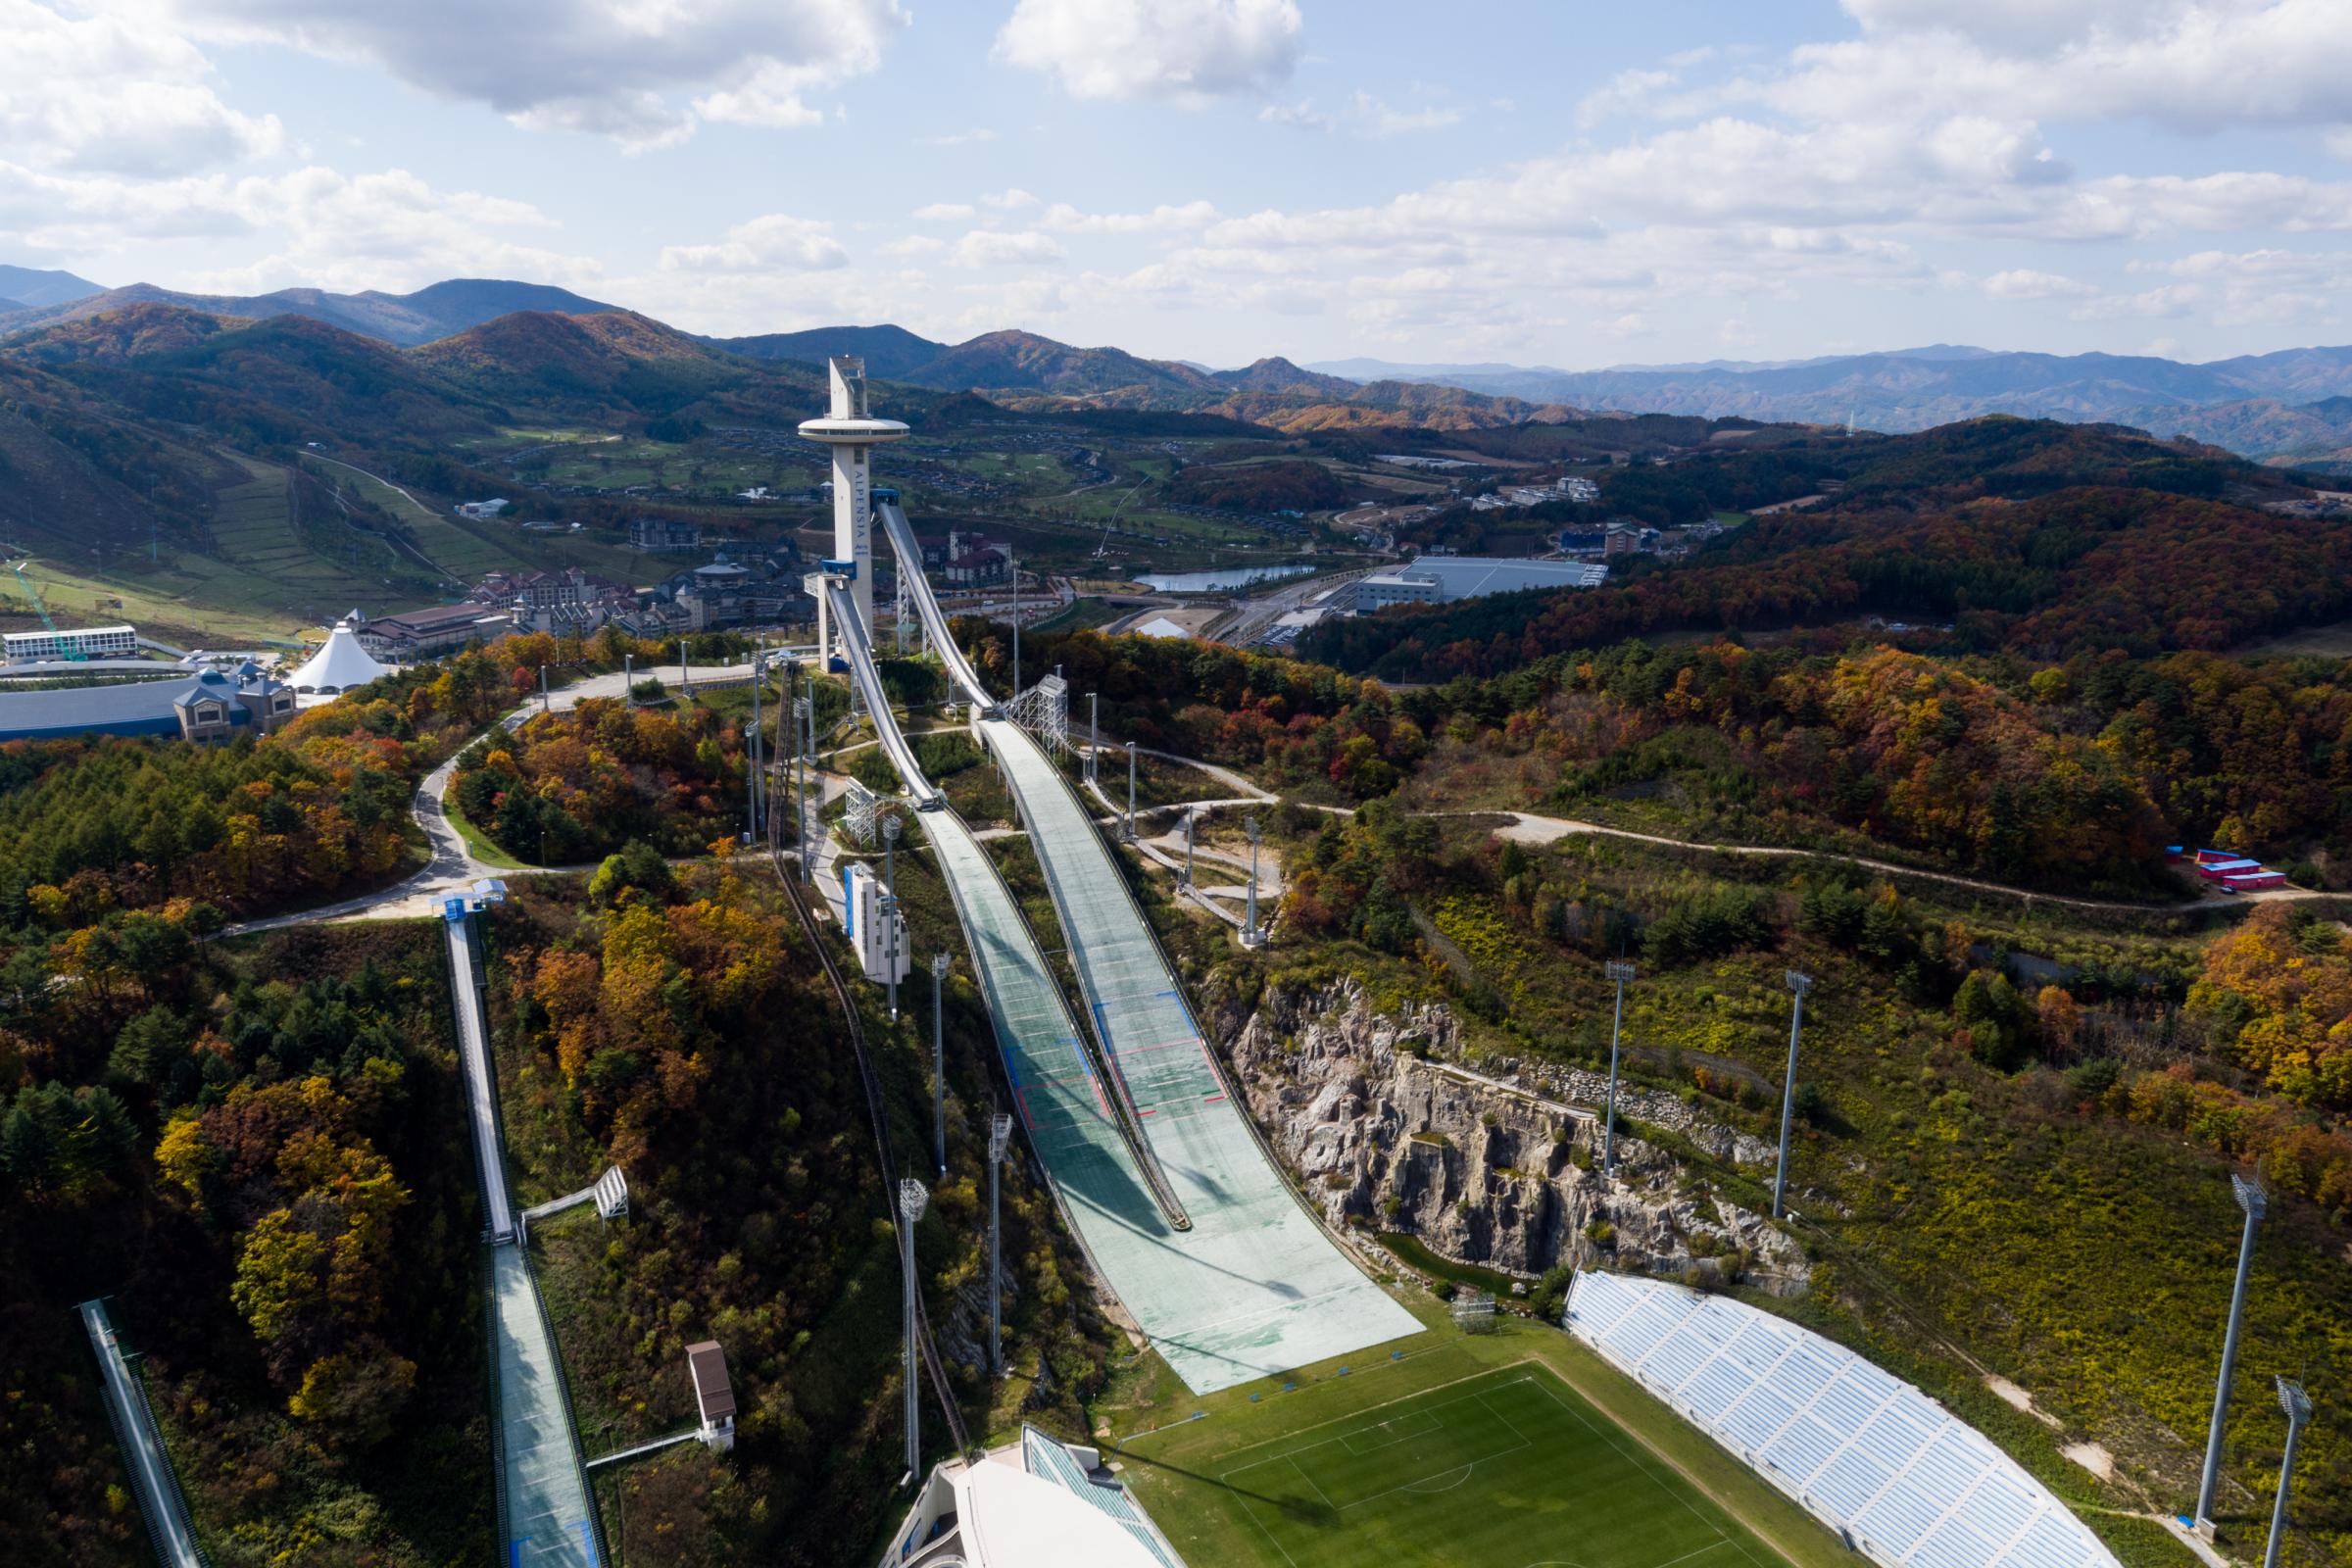 Preparations for the 2018 Winter Olympic Games